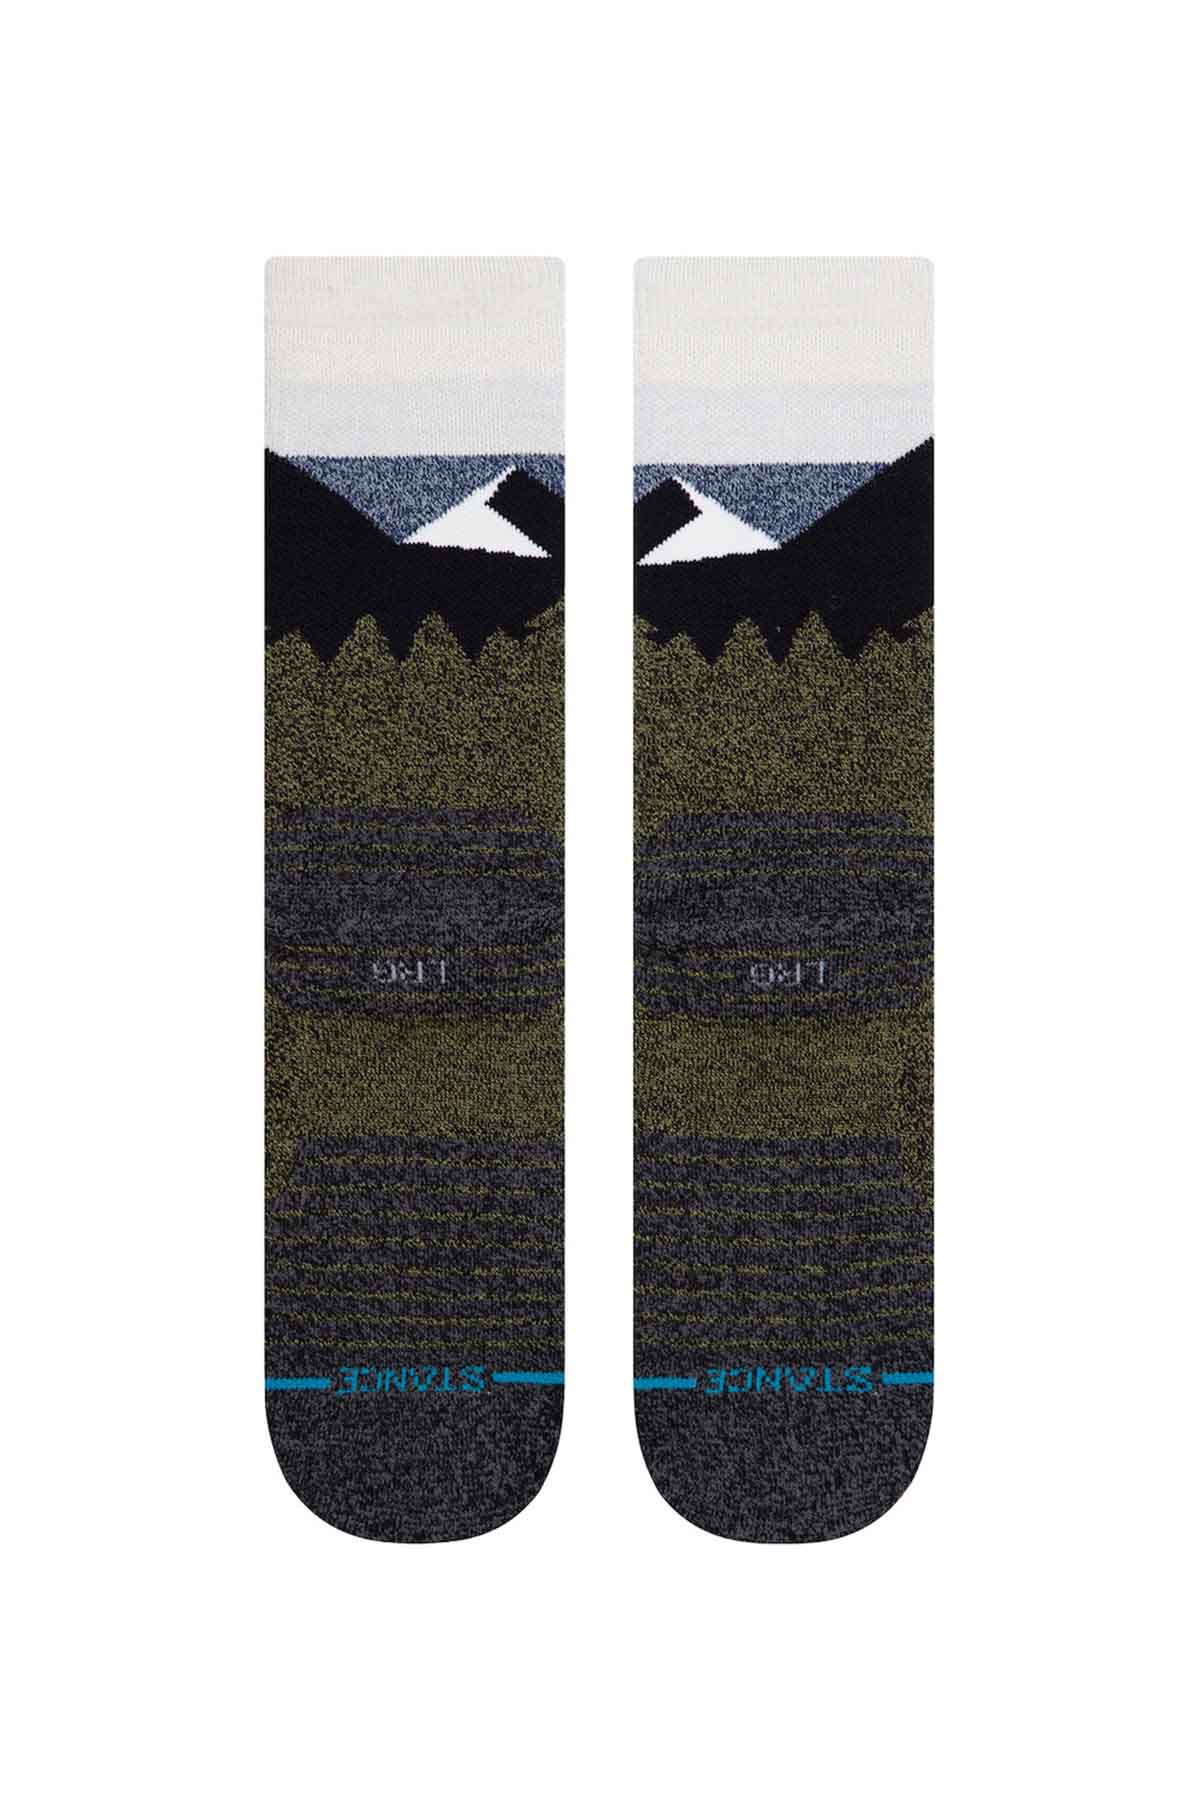 Stance - Divided Crew - Green - Back